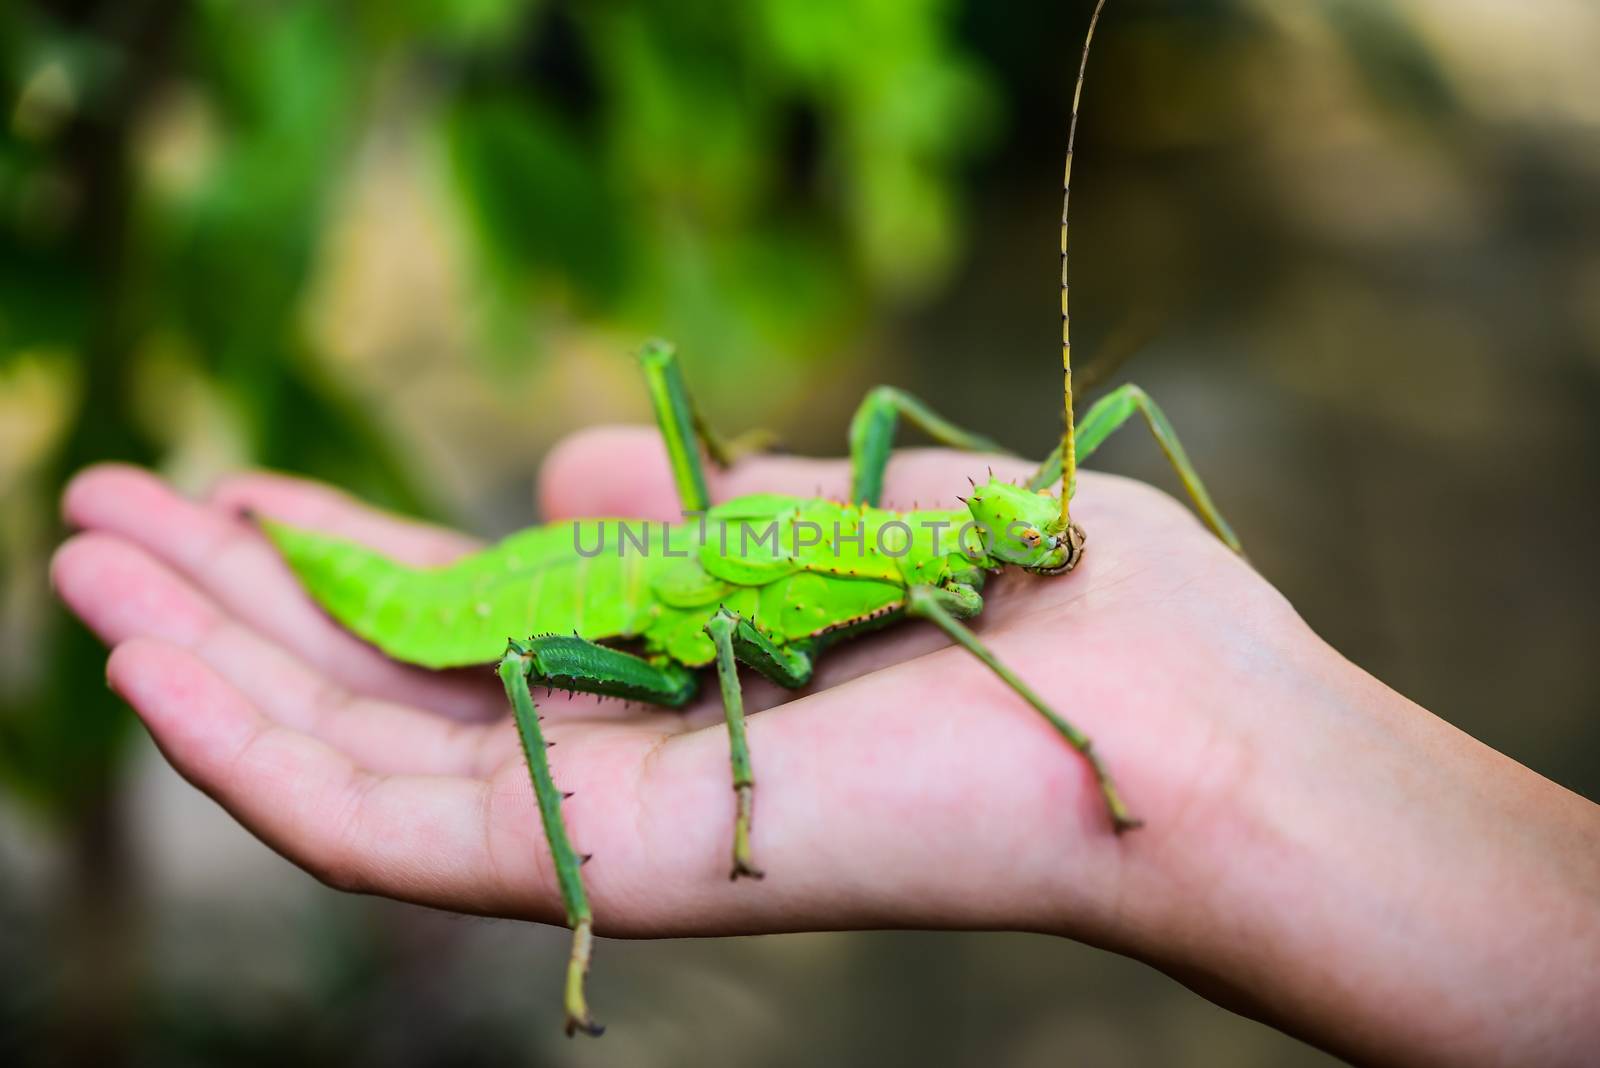 Phylliidae, green in the hand. Phylliidae are shaped like leaves by photobyphotoboy